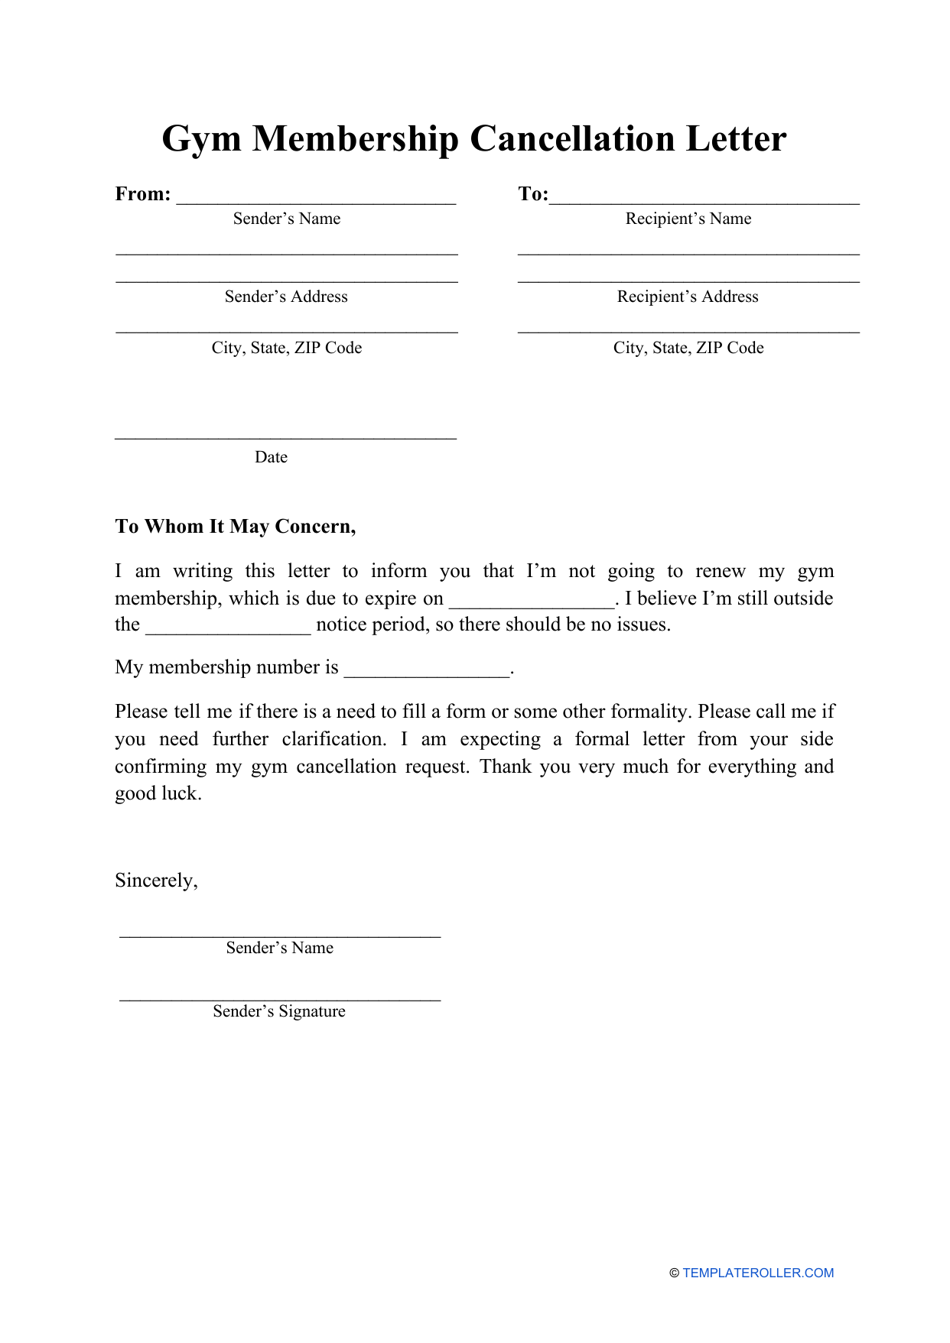 gym-membership-cancellation-letter-template-download-printable-pdf-templateroller